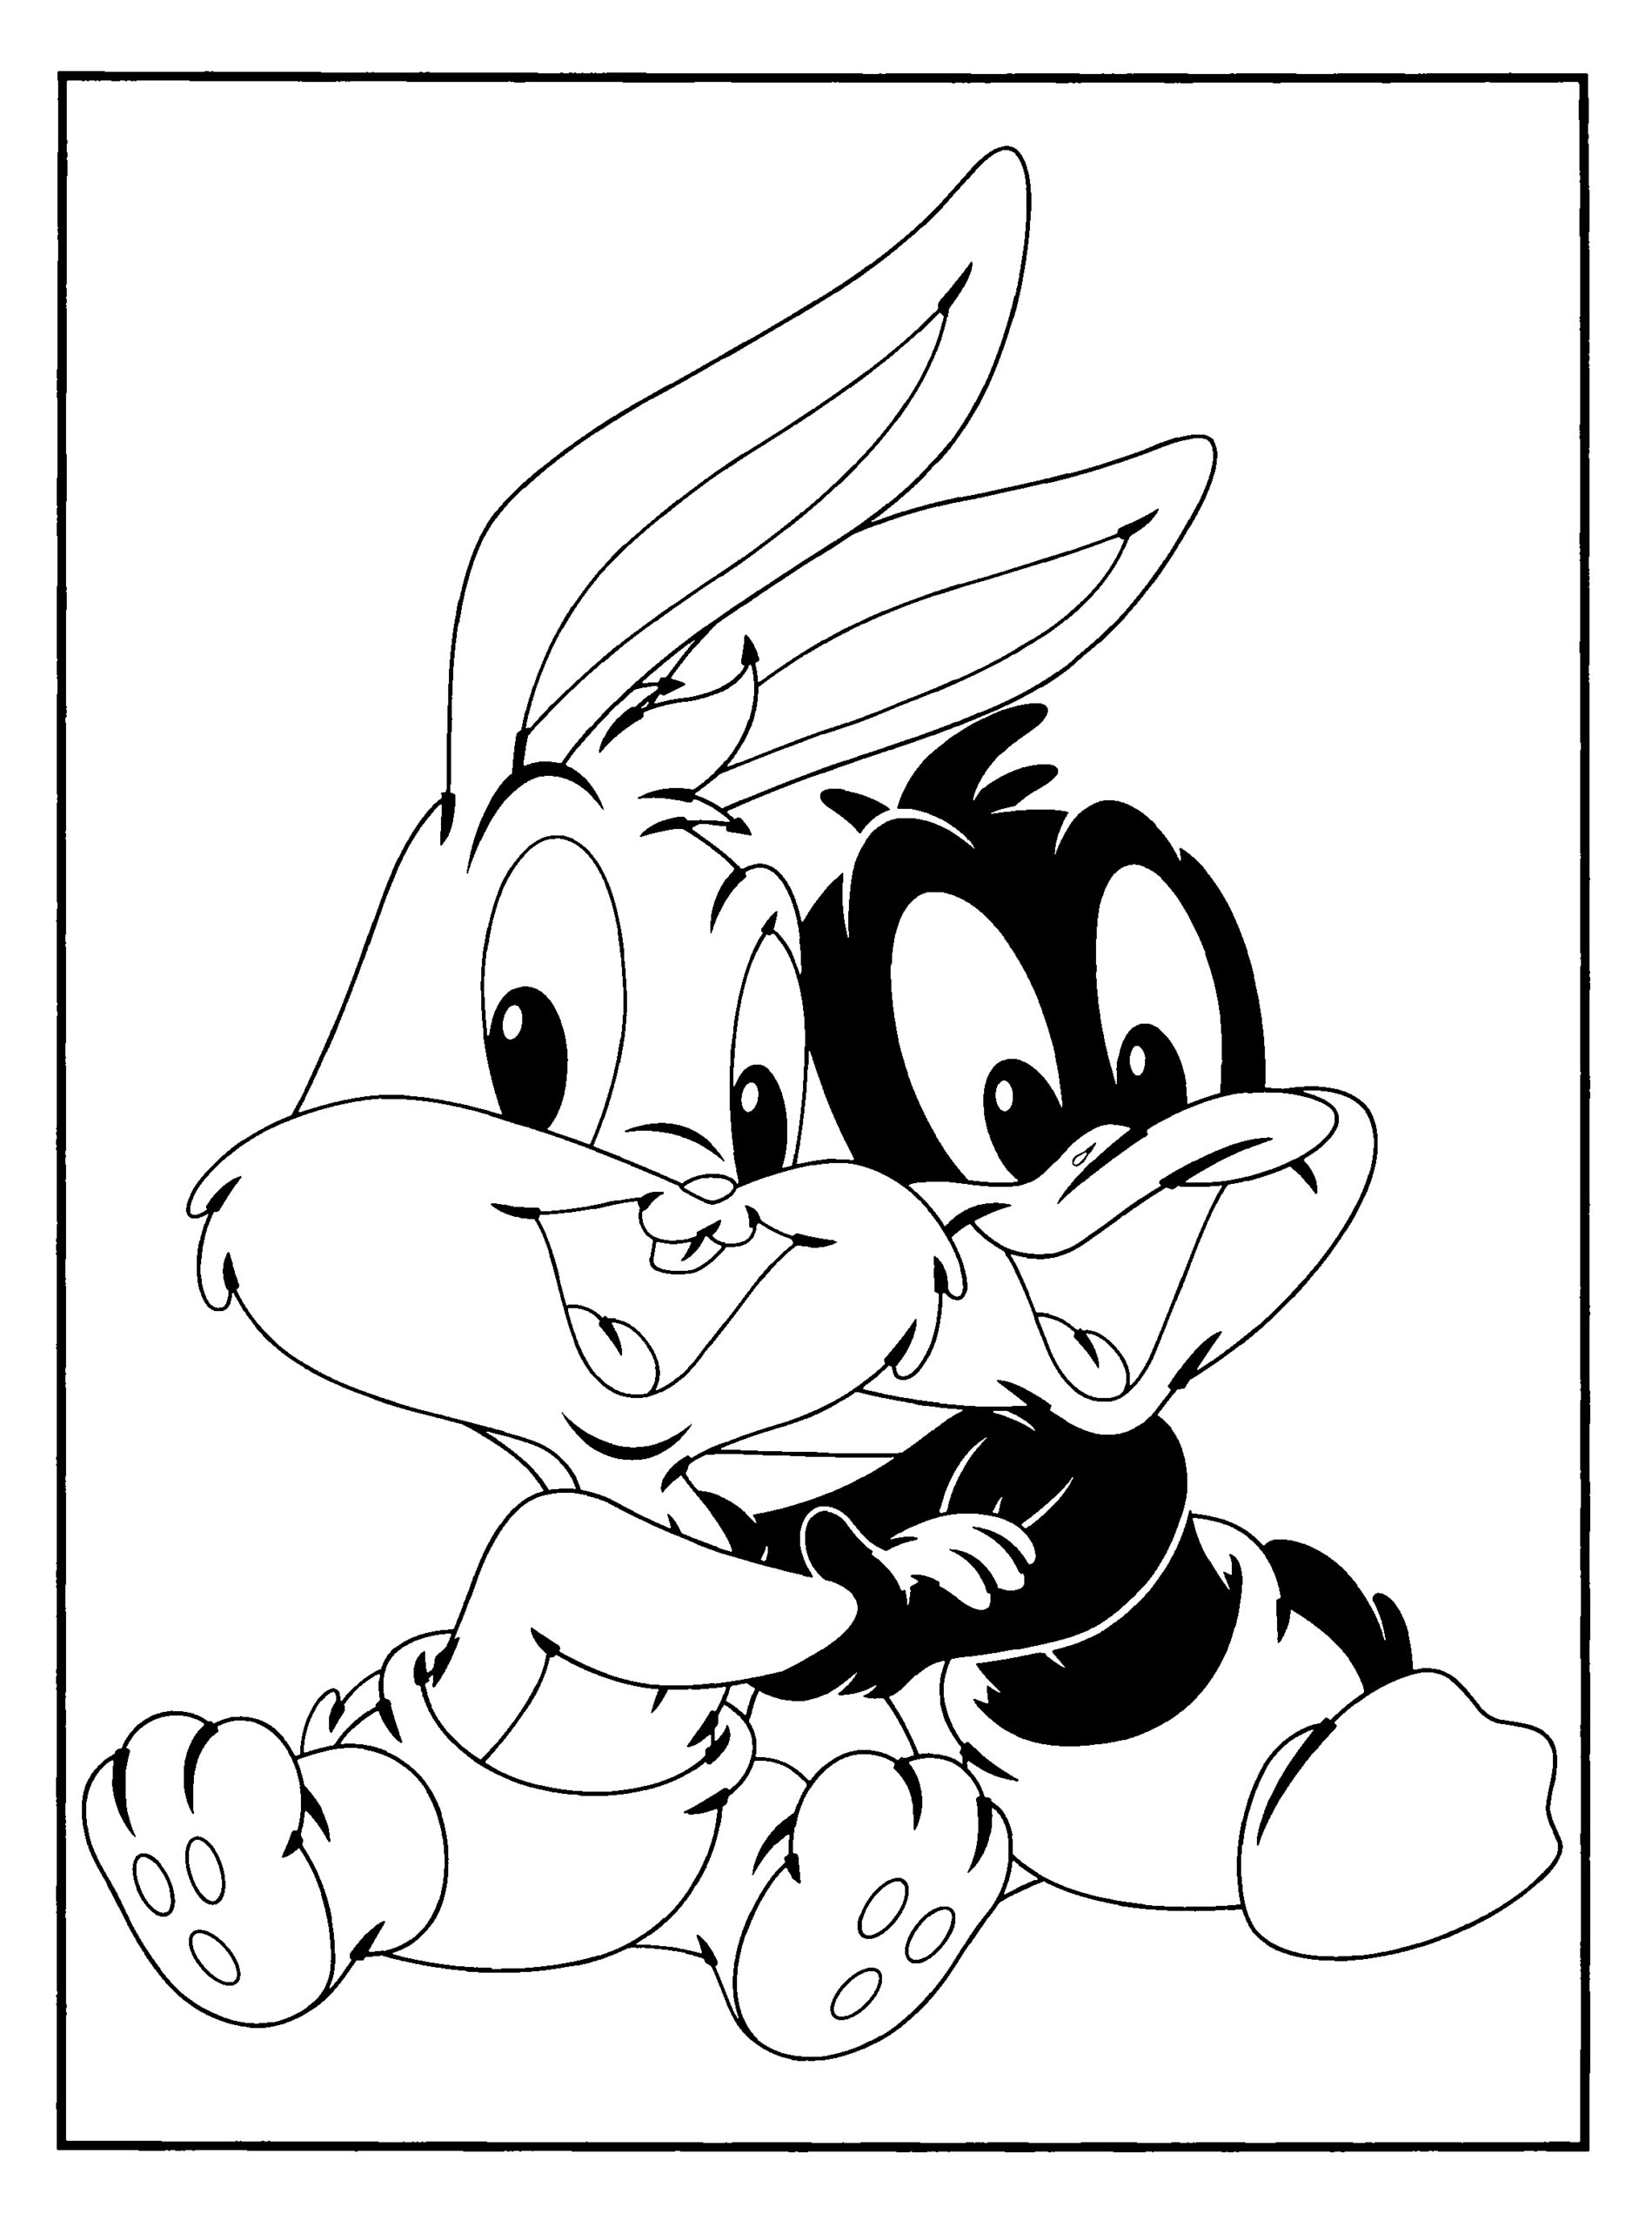 Baby Looney Tunes Coloring Pages TV Film baby looney tunes 1 Printable 2020 00407 Coloring4free